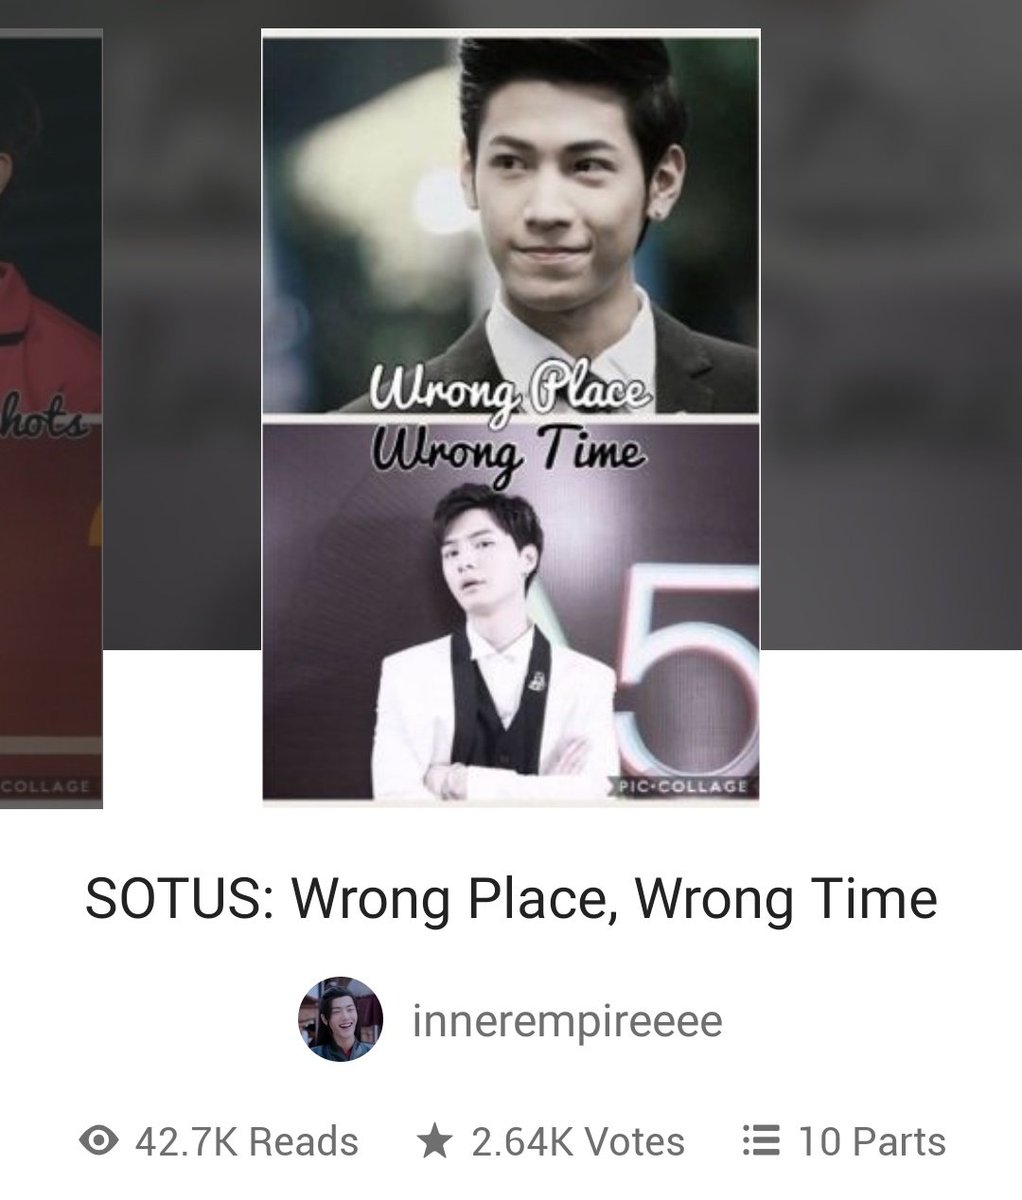  SOTUS: Wrong Place, Wrong Time by innerempireeeeI have mentioned this DISCONTINUED fic before and I'll still recommend this kahit di na siya natapos. Gahhhd. I loved the kinks HAHAHAAHAHAHAlink:  https://my.w.tt/mevox4veS6 